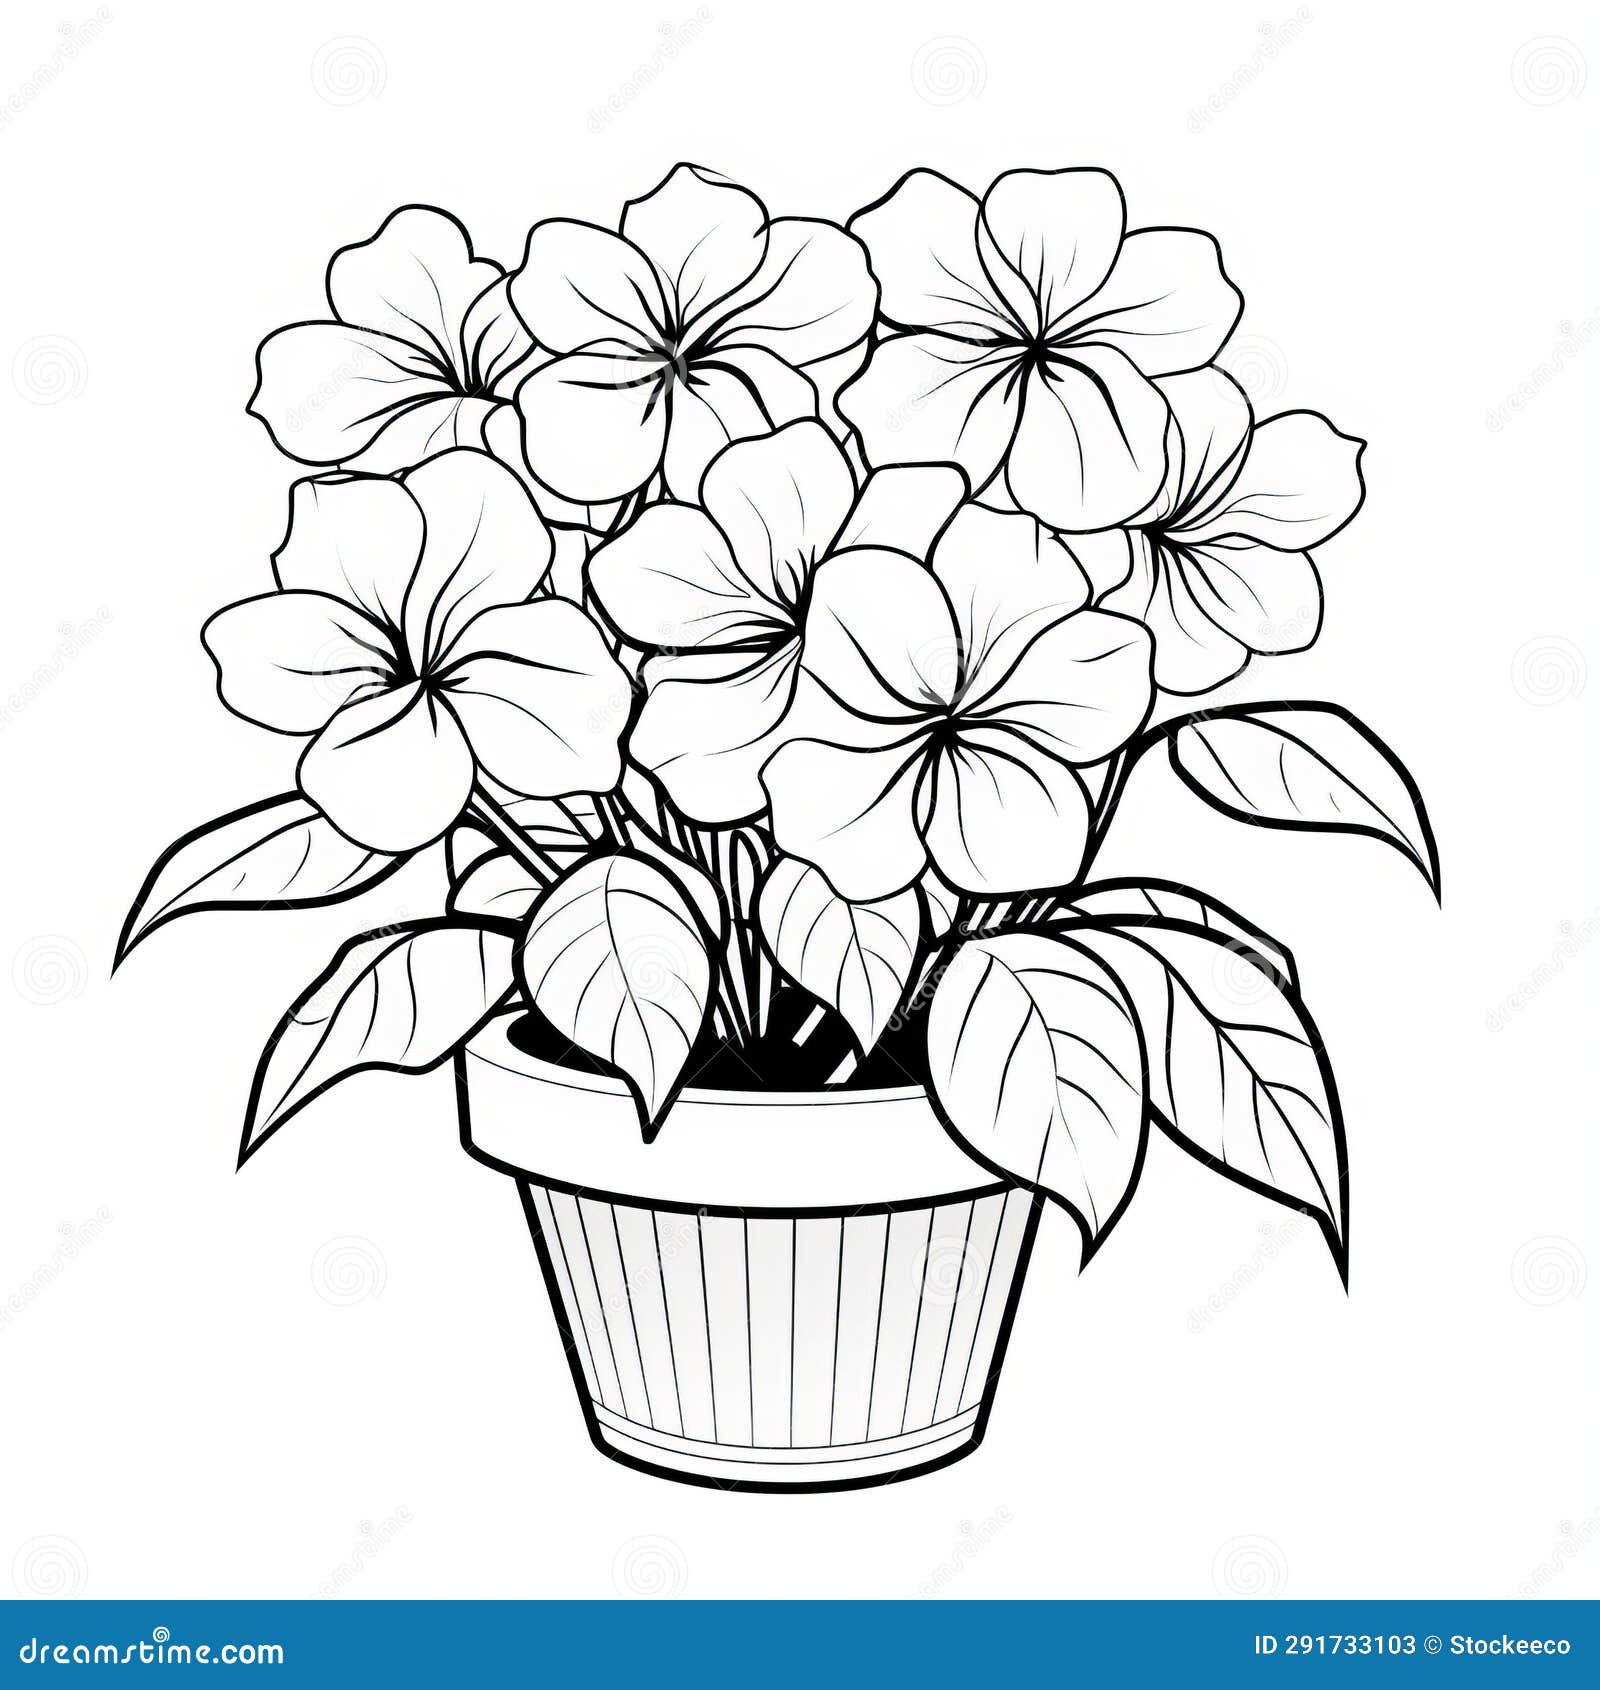 Luminous Sfumato: High Resolution Coloring Pages of Two Flowers in a ...